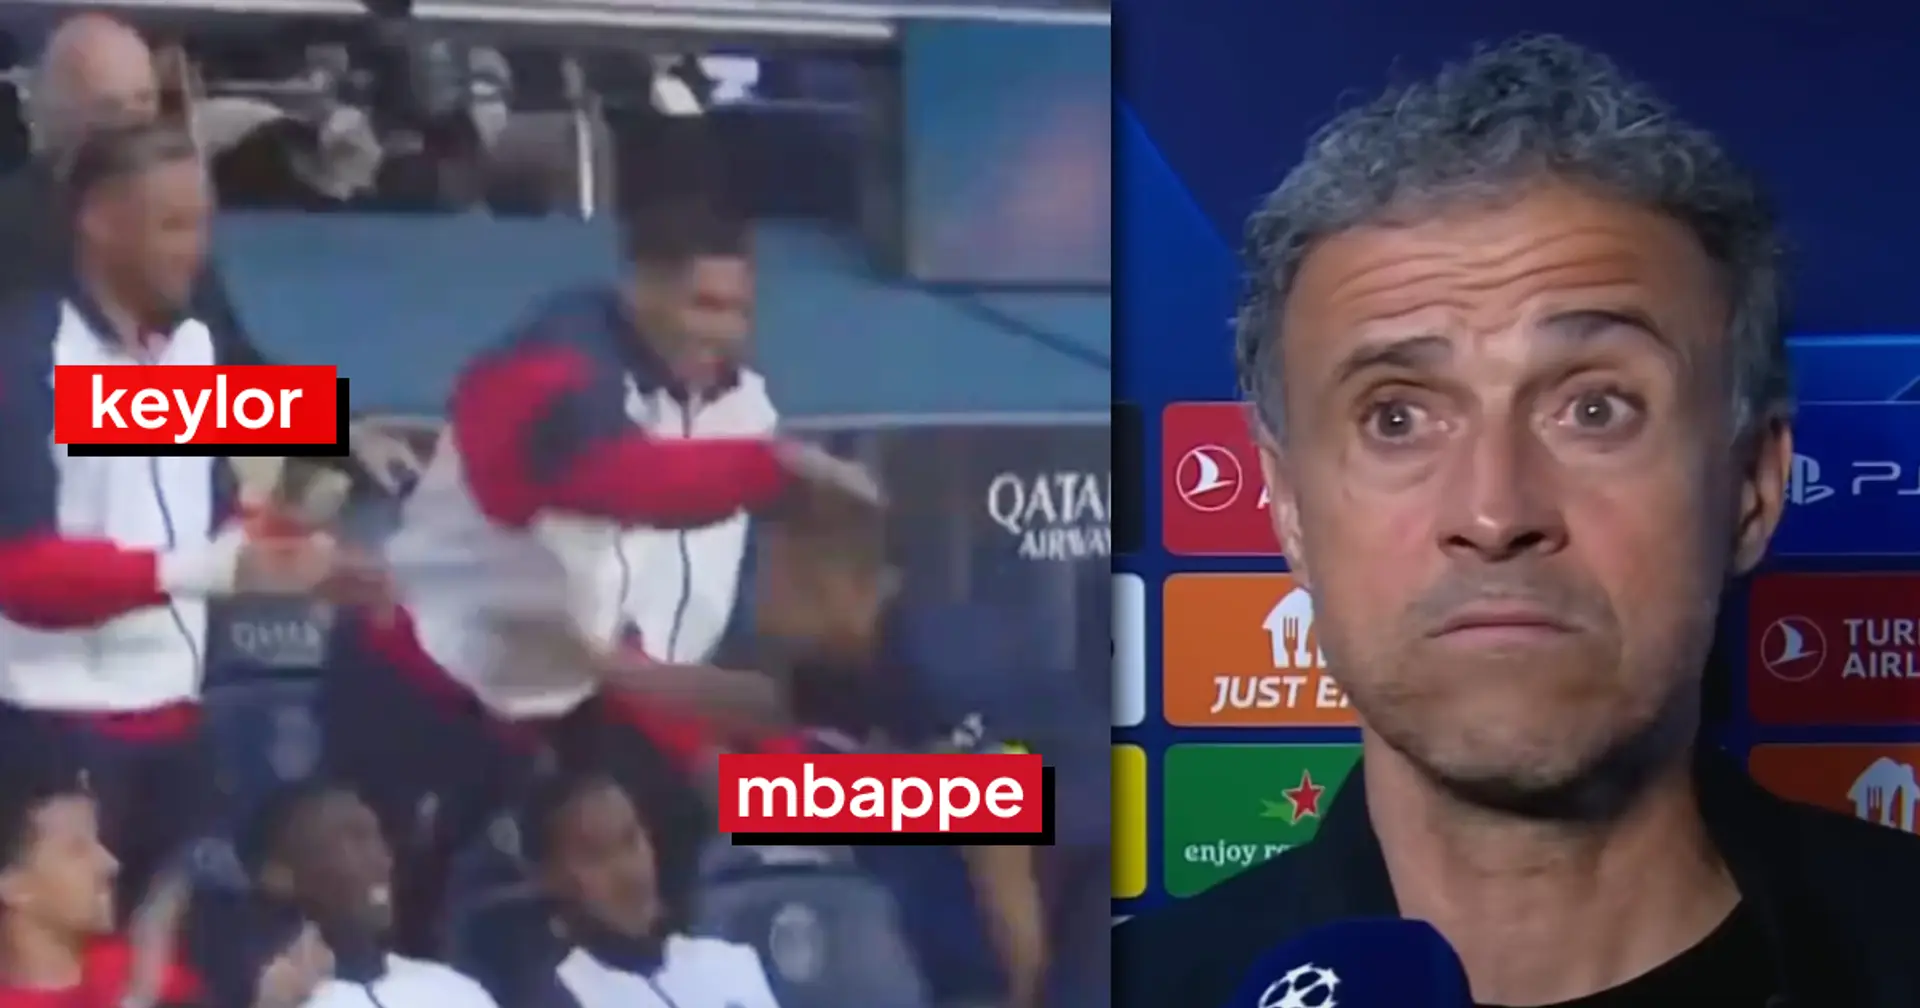 Luis Enrique 'forgets' to give Keylor Navas farewell PSG game - see what Mbappe did to Navas instead 